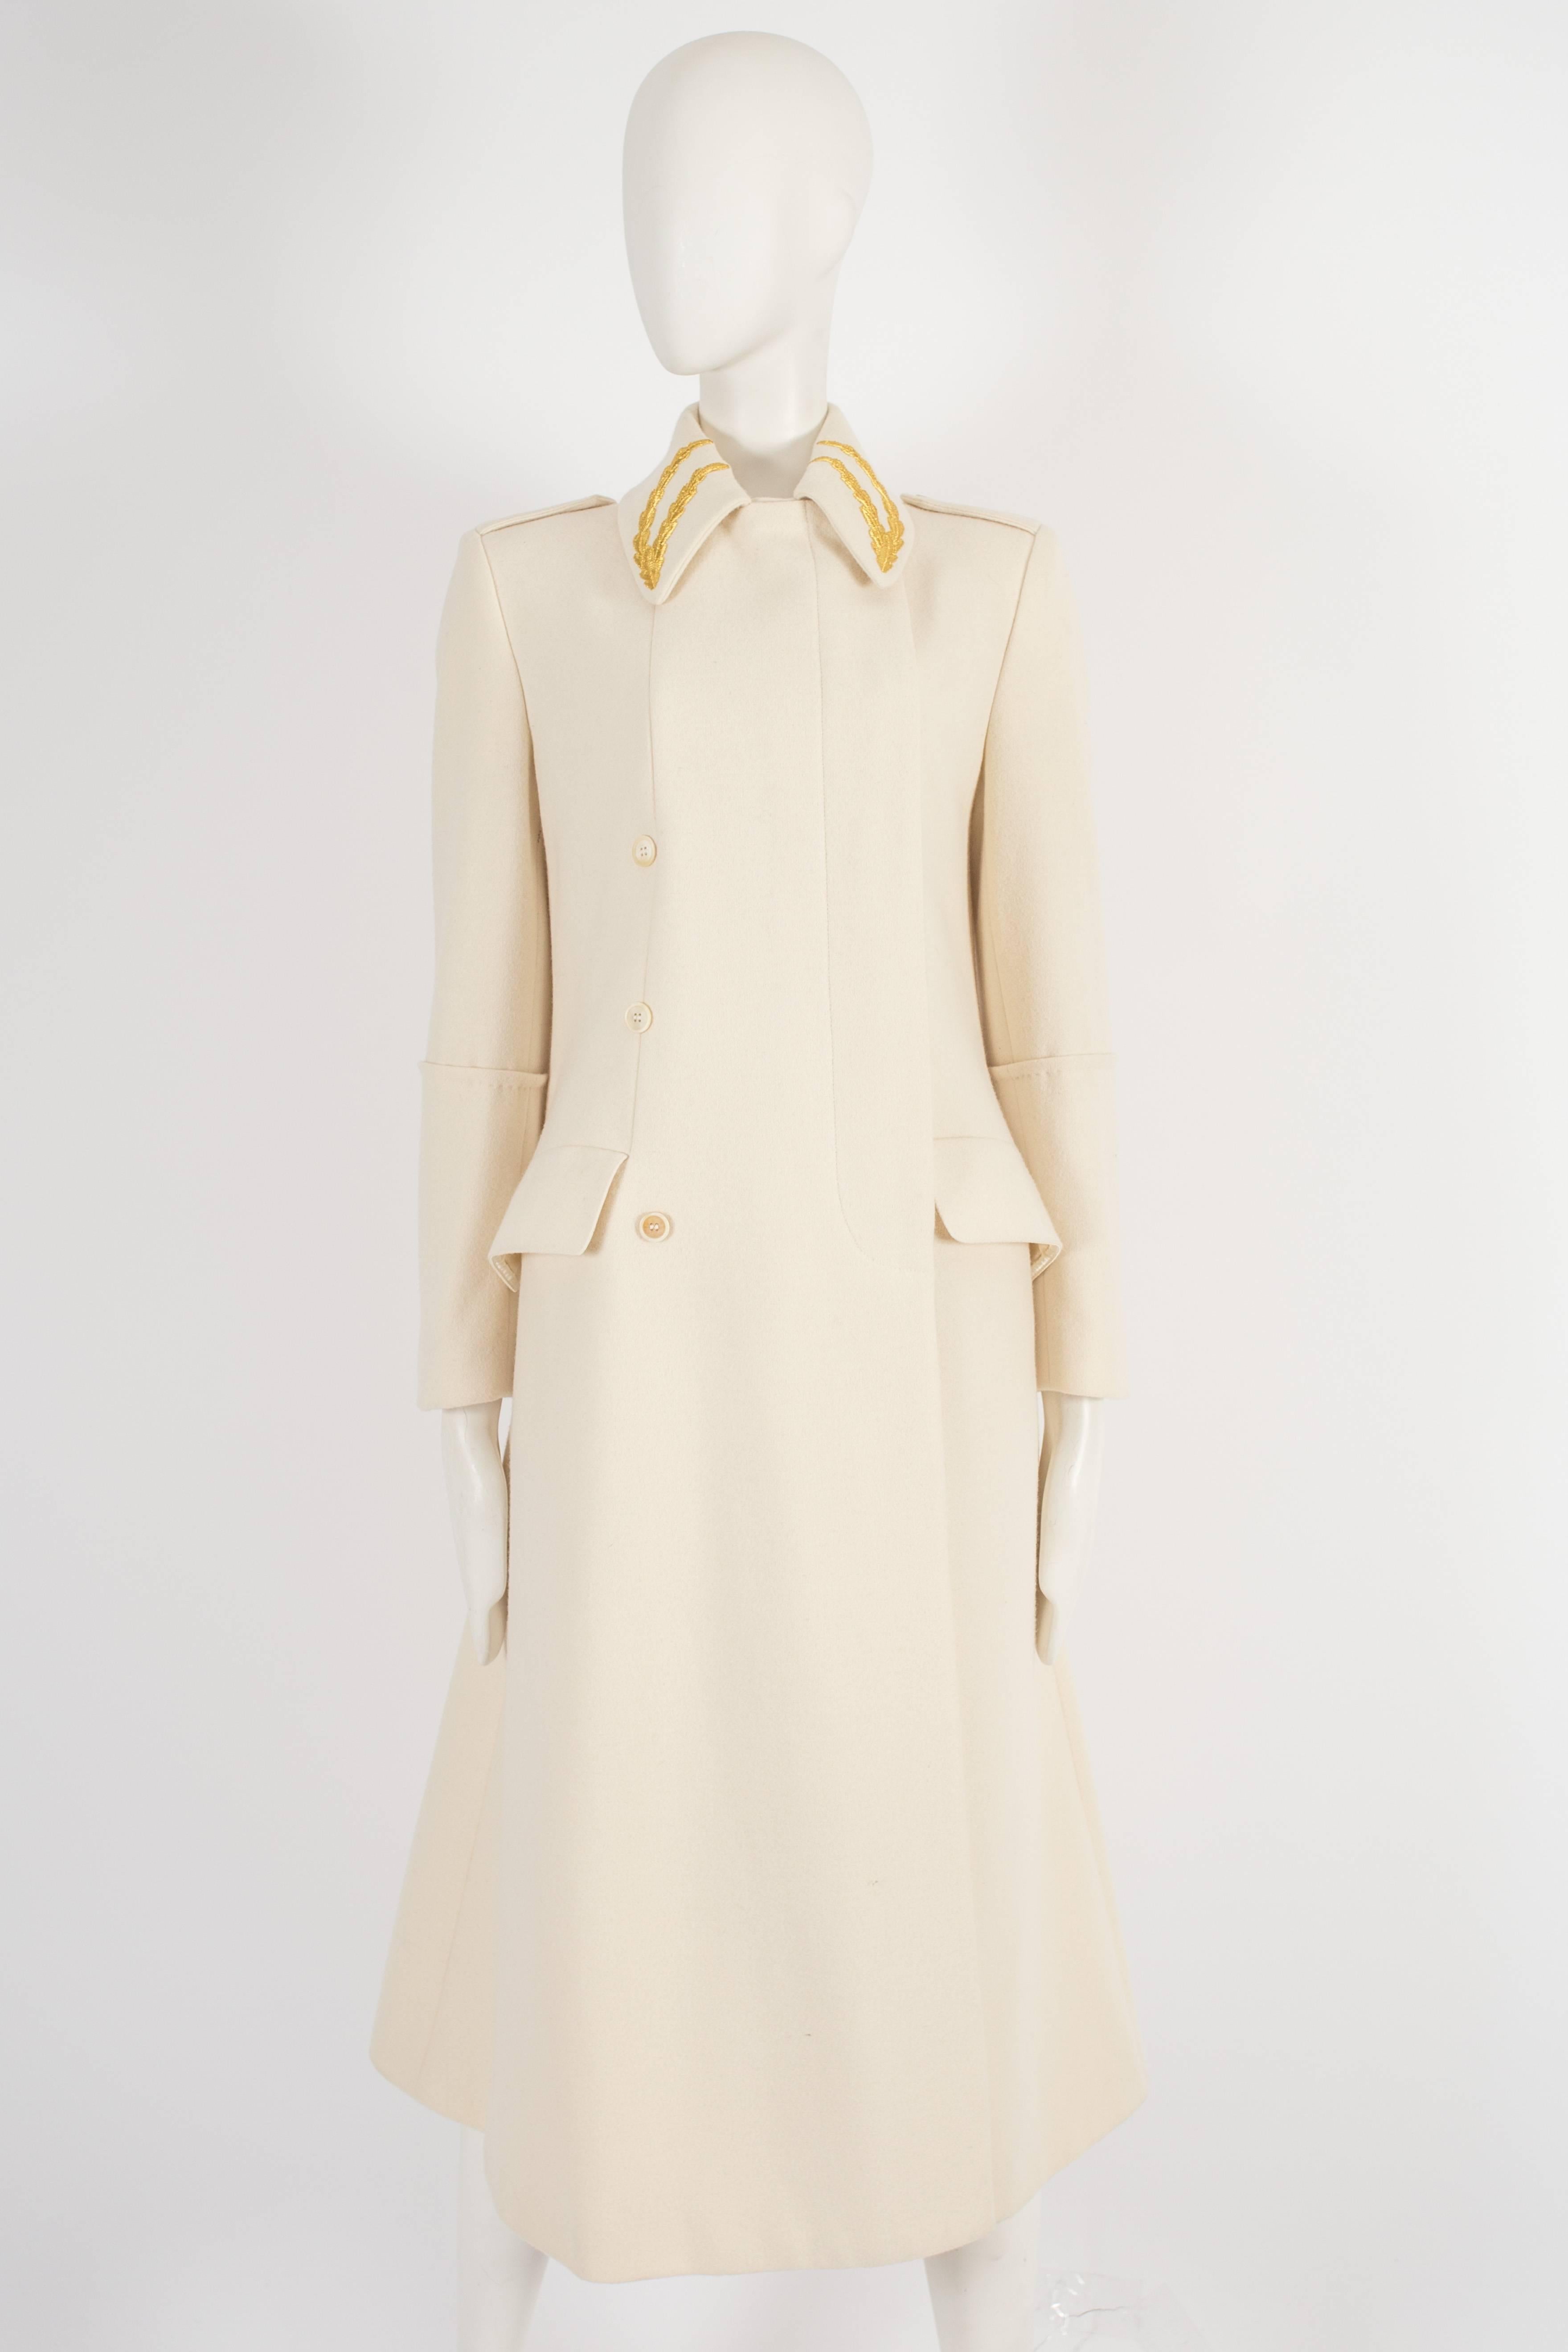 Alexander McQueen tailored cream coat, circa 1990s. The coat is constructed in a heavy wool and features two gold motifs on each collar and hidden button fastenings.